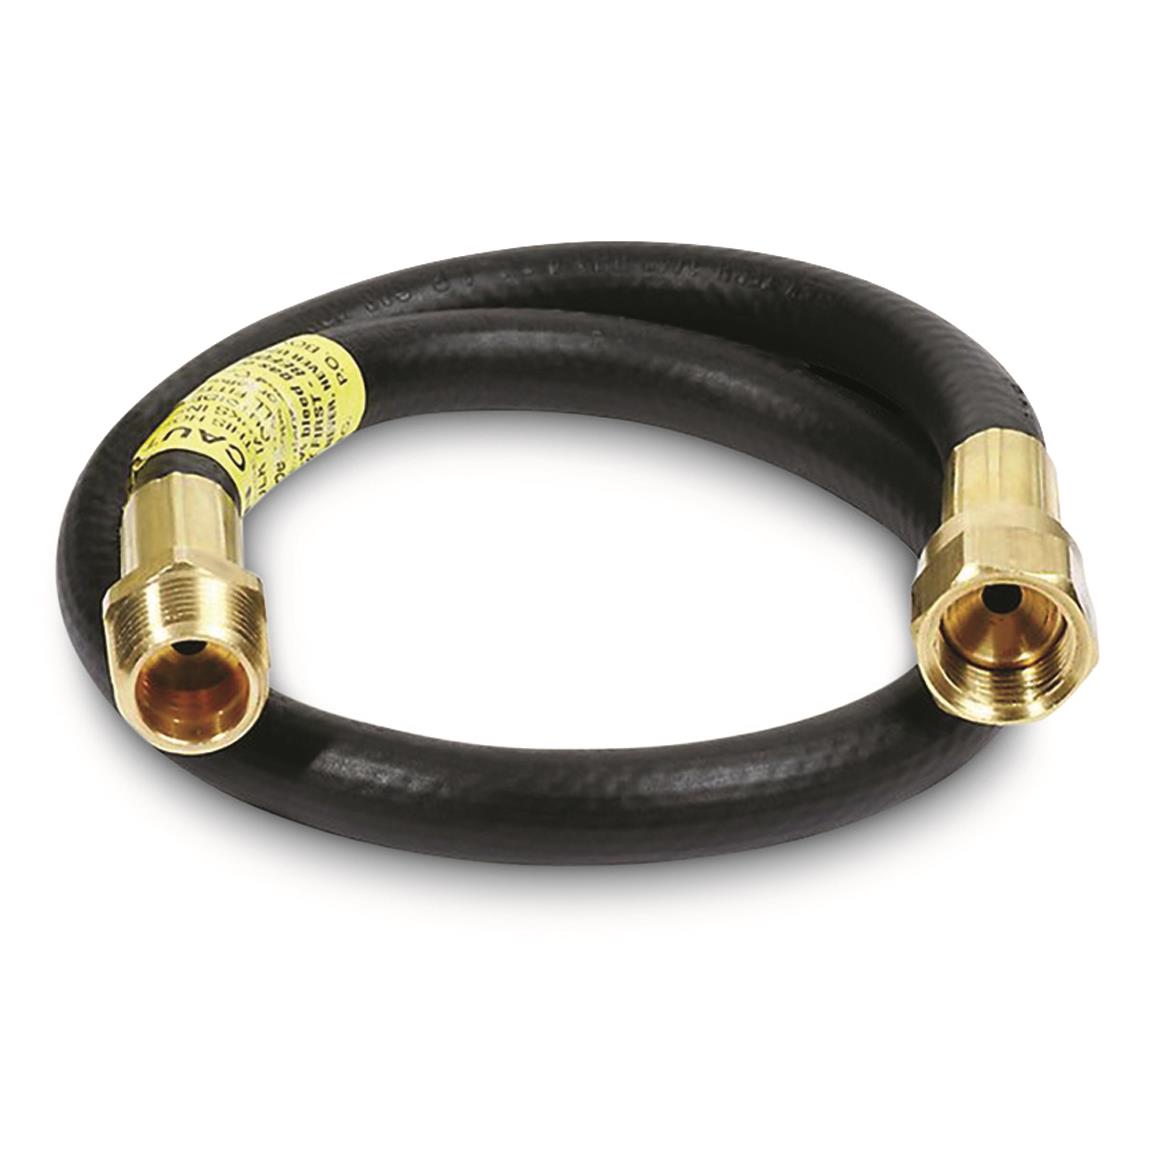 Mr. Heater 22" Propane Replacement BBQ Grill Hose